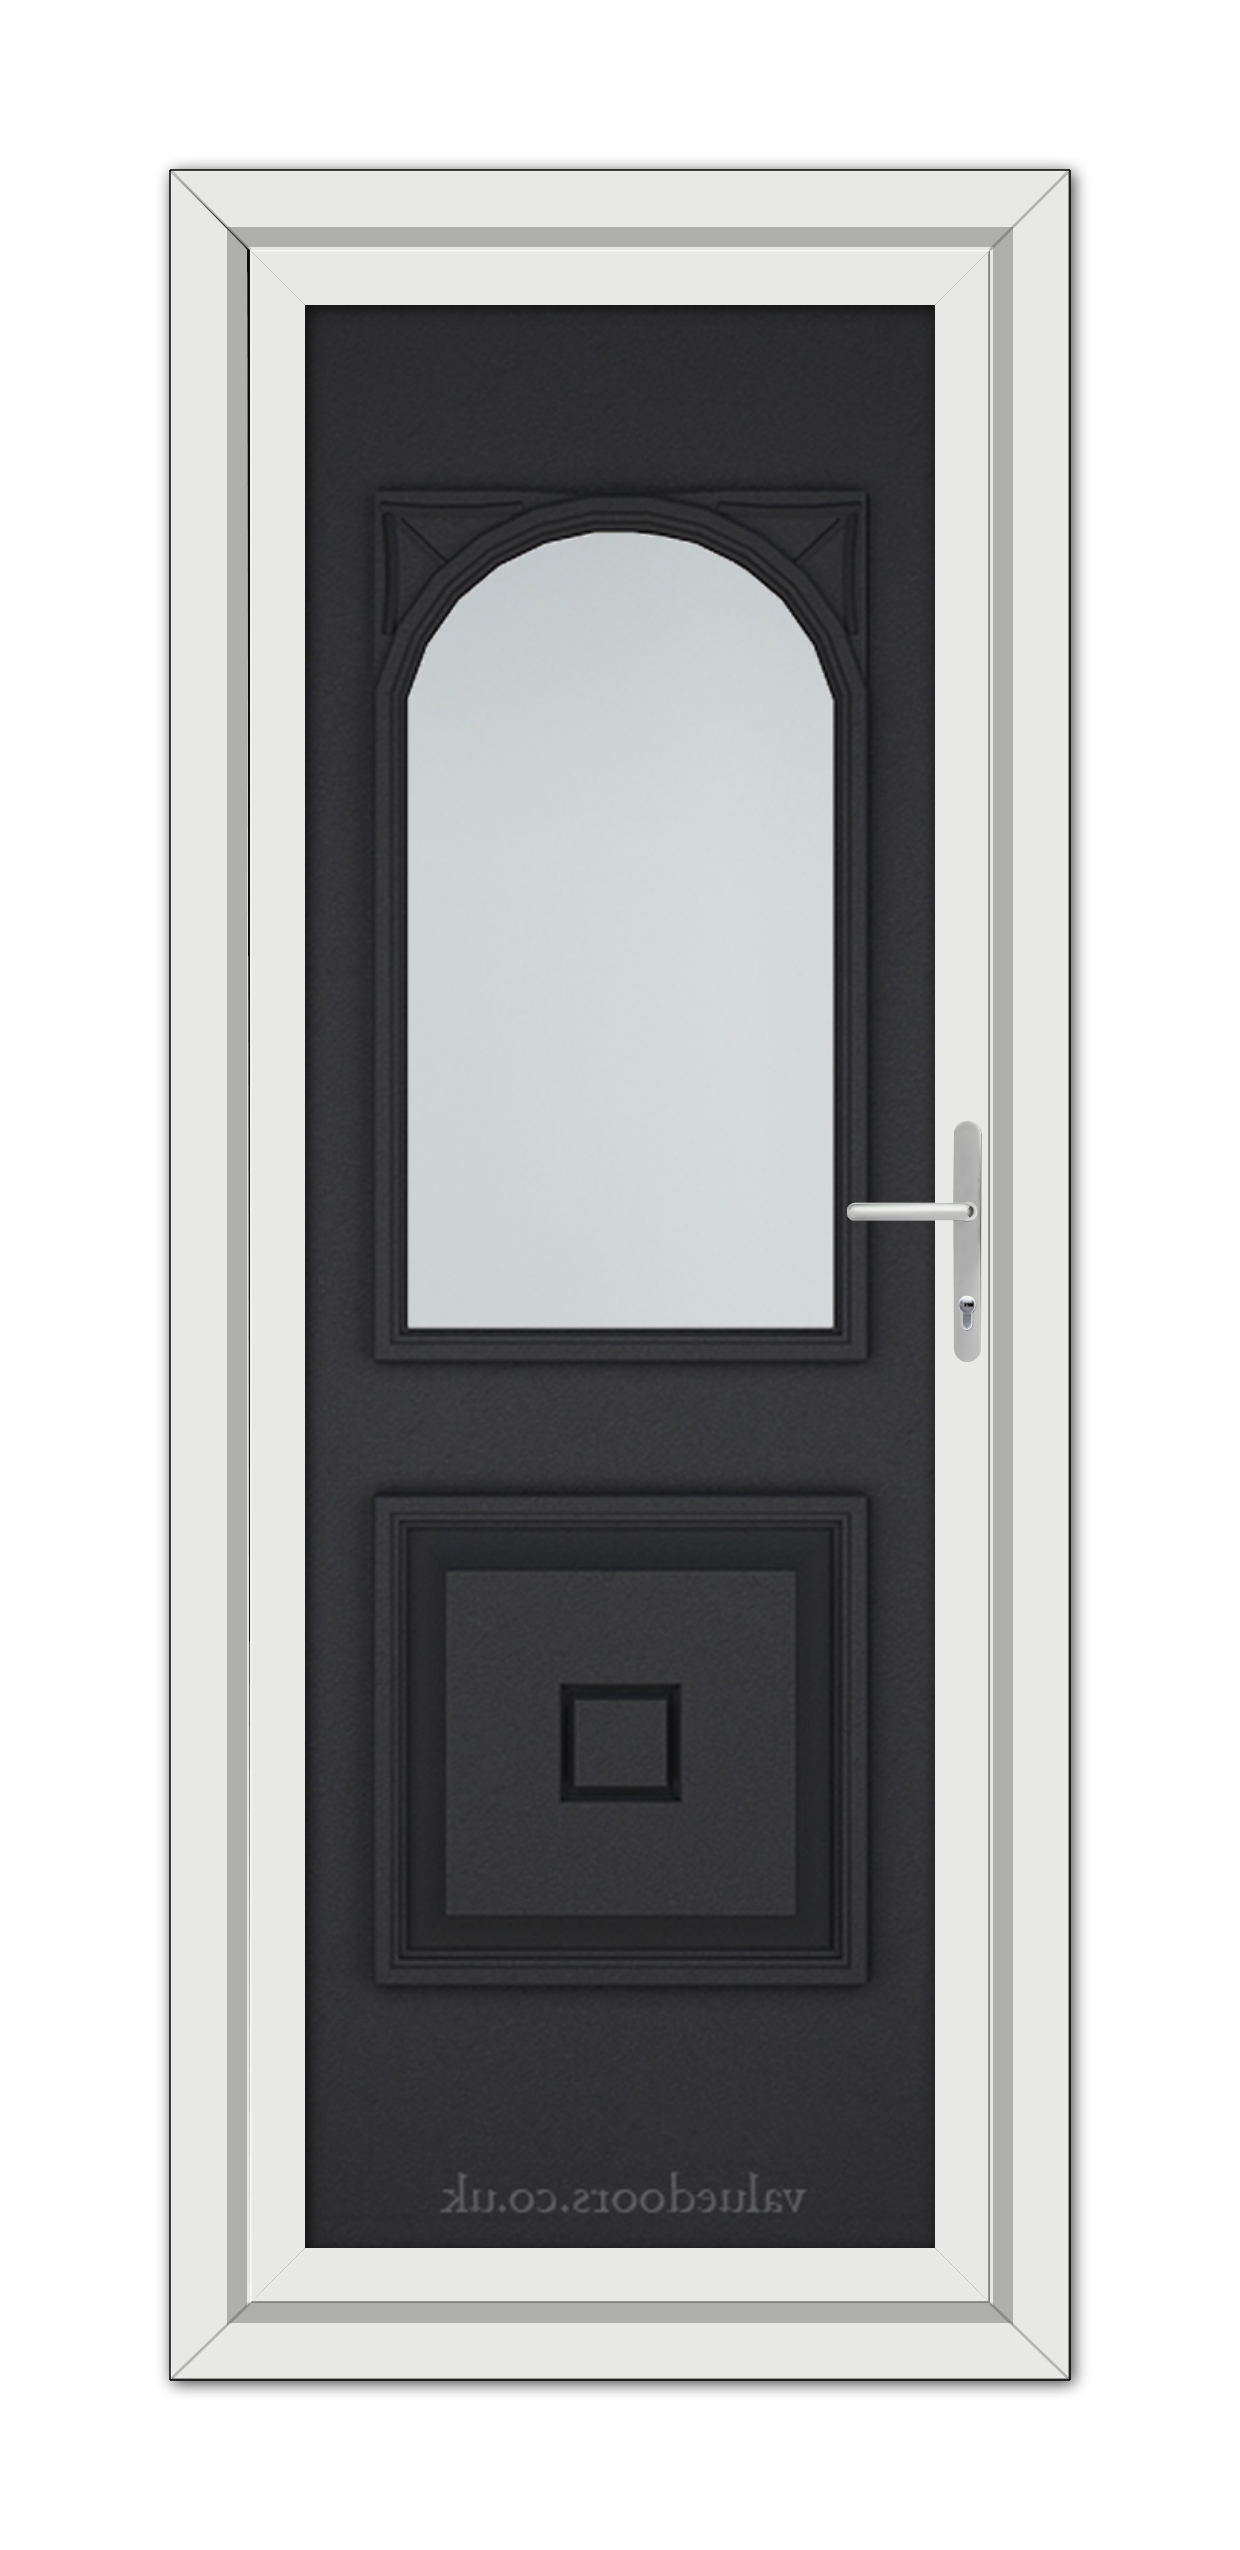 A modern Black Brown Reims uPVC Door with a vertical oval glass panel and silver handle set in a white frame.